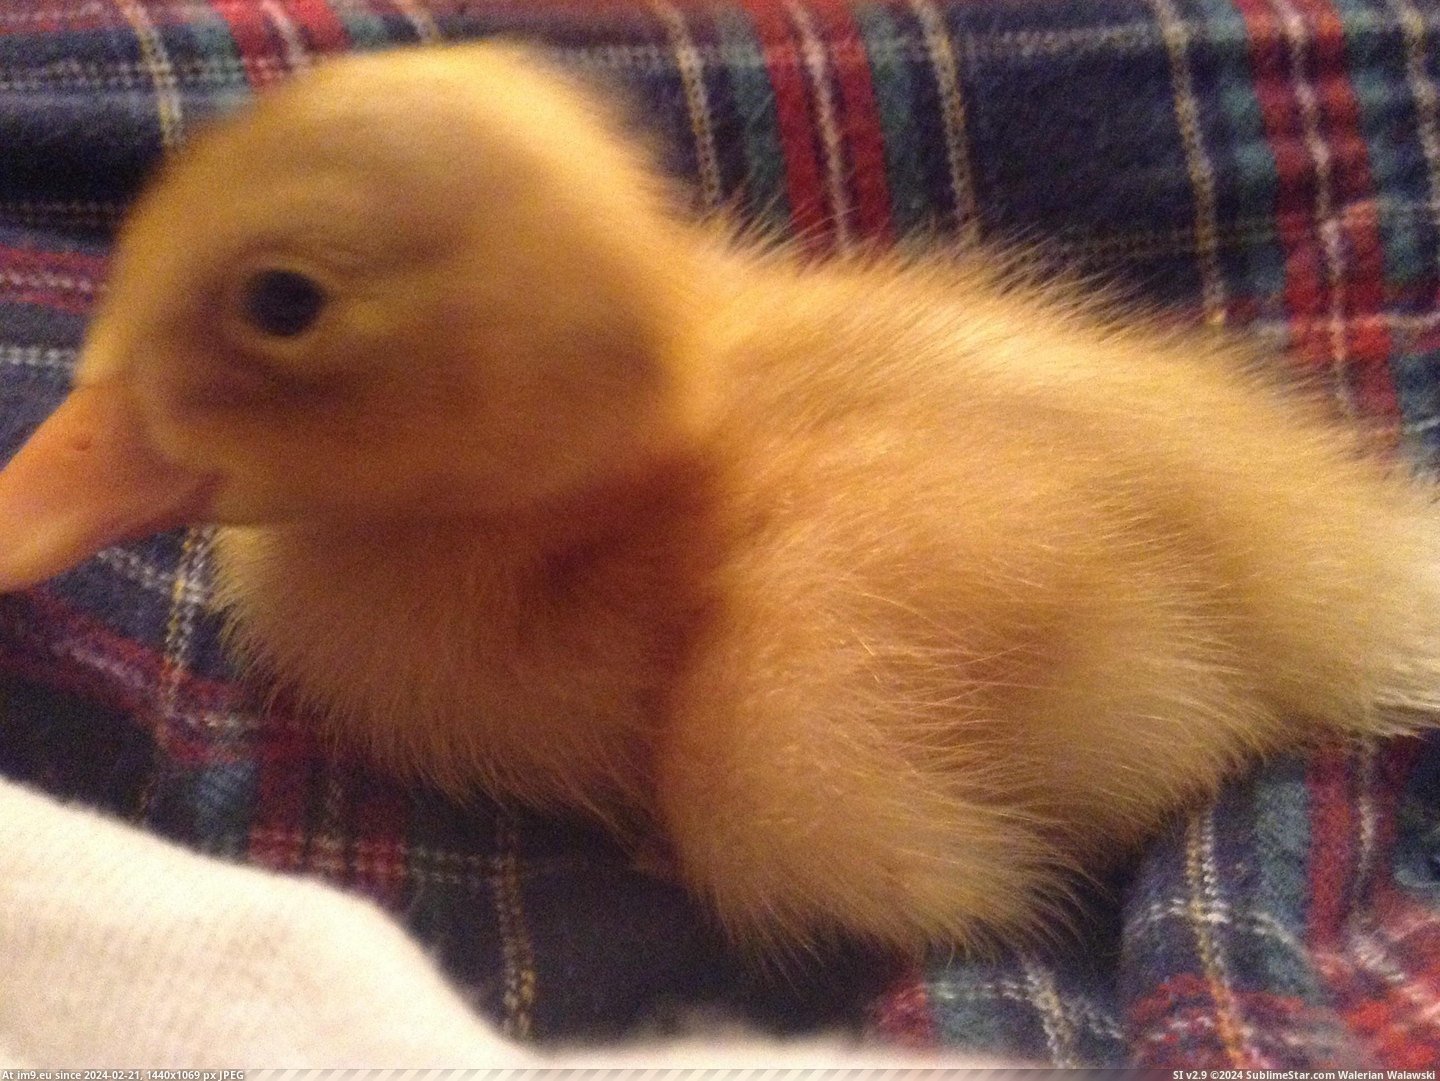 #Baby #Duck #Popularity #Excited #Stanley [Aww] My baby duck Stanley was excited for all the popularity, so here are some more pictures! 4 Pic. (Image of album My r/AWW favs))